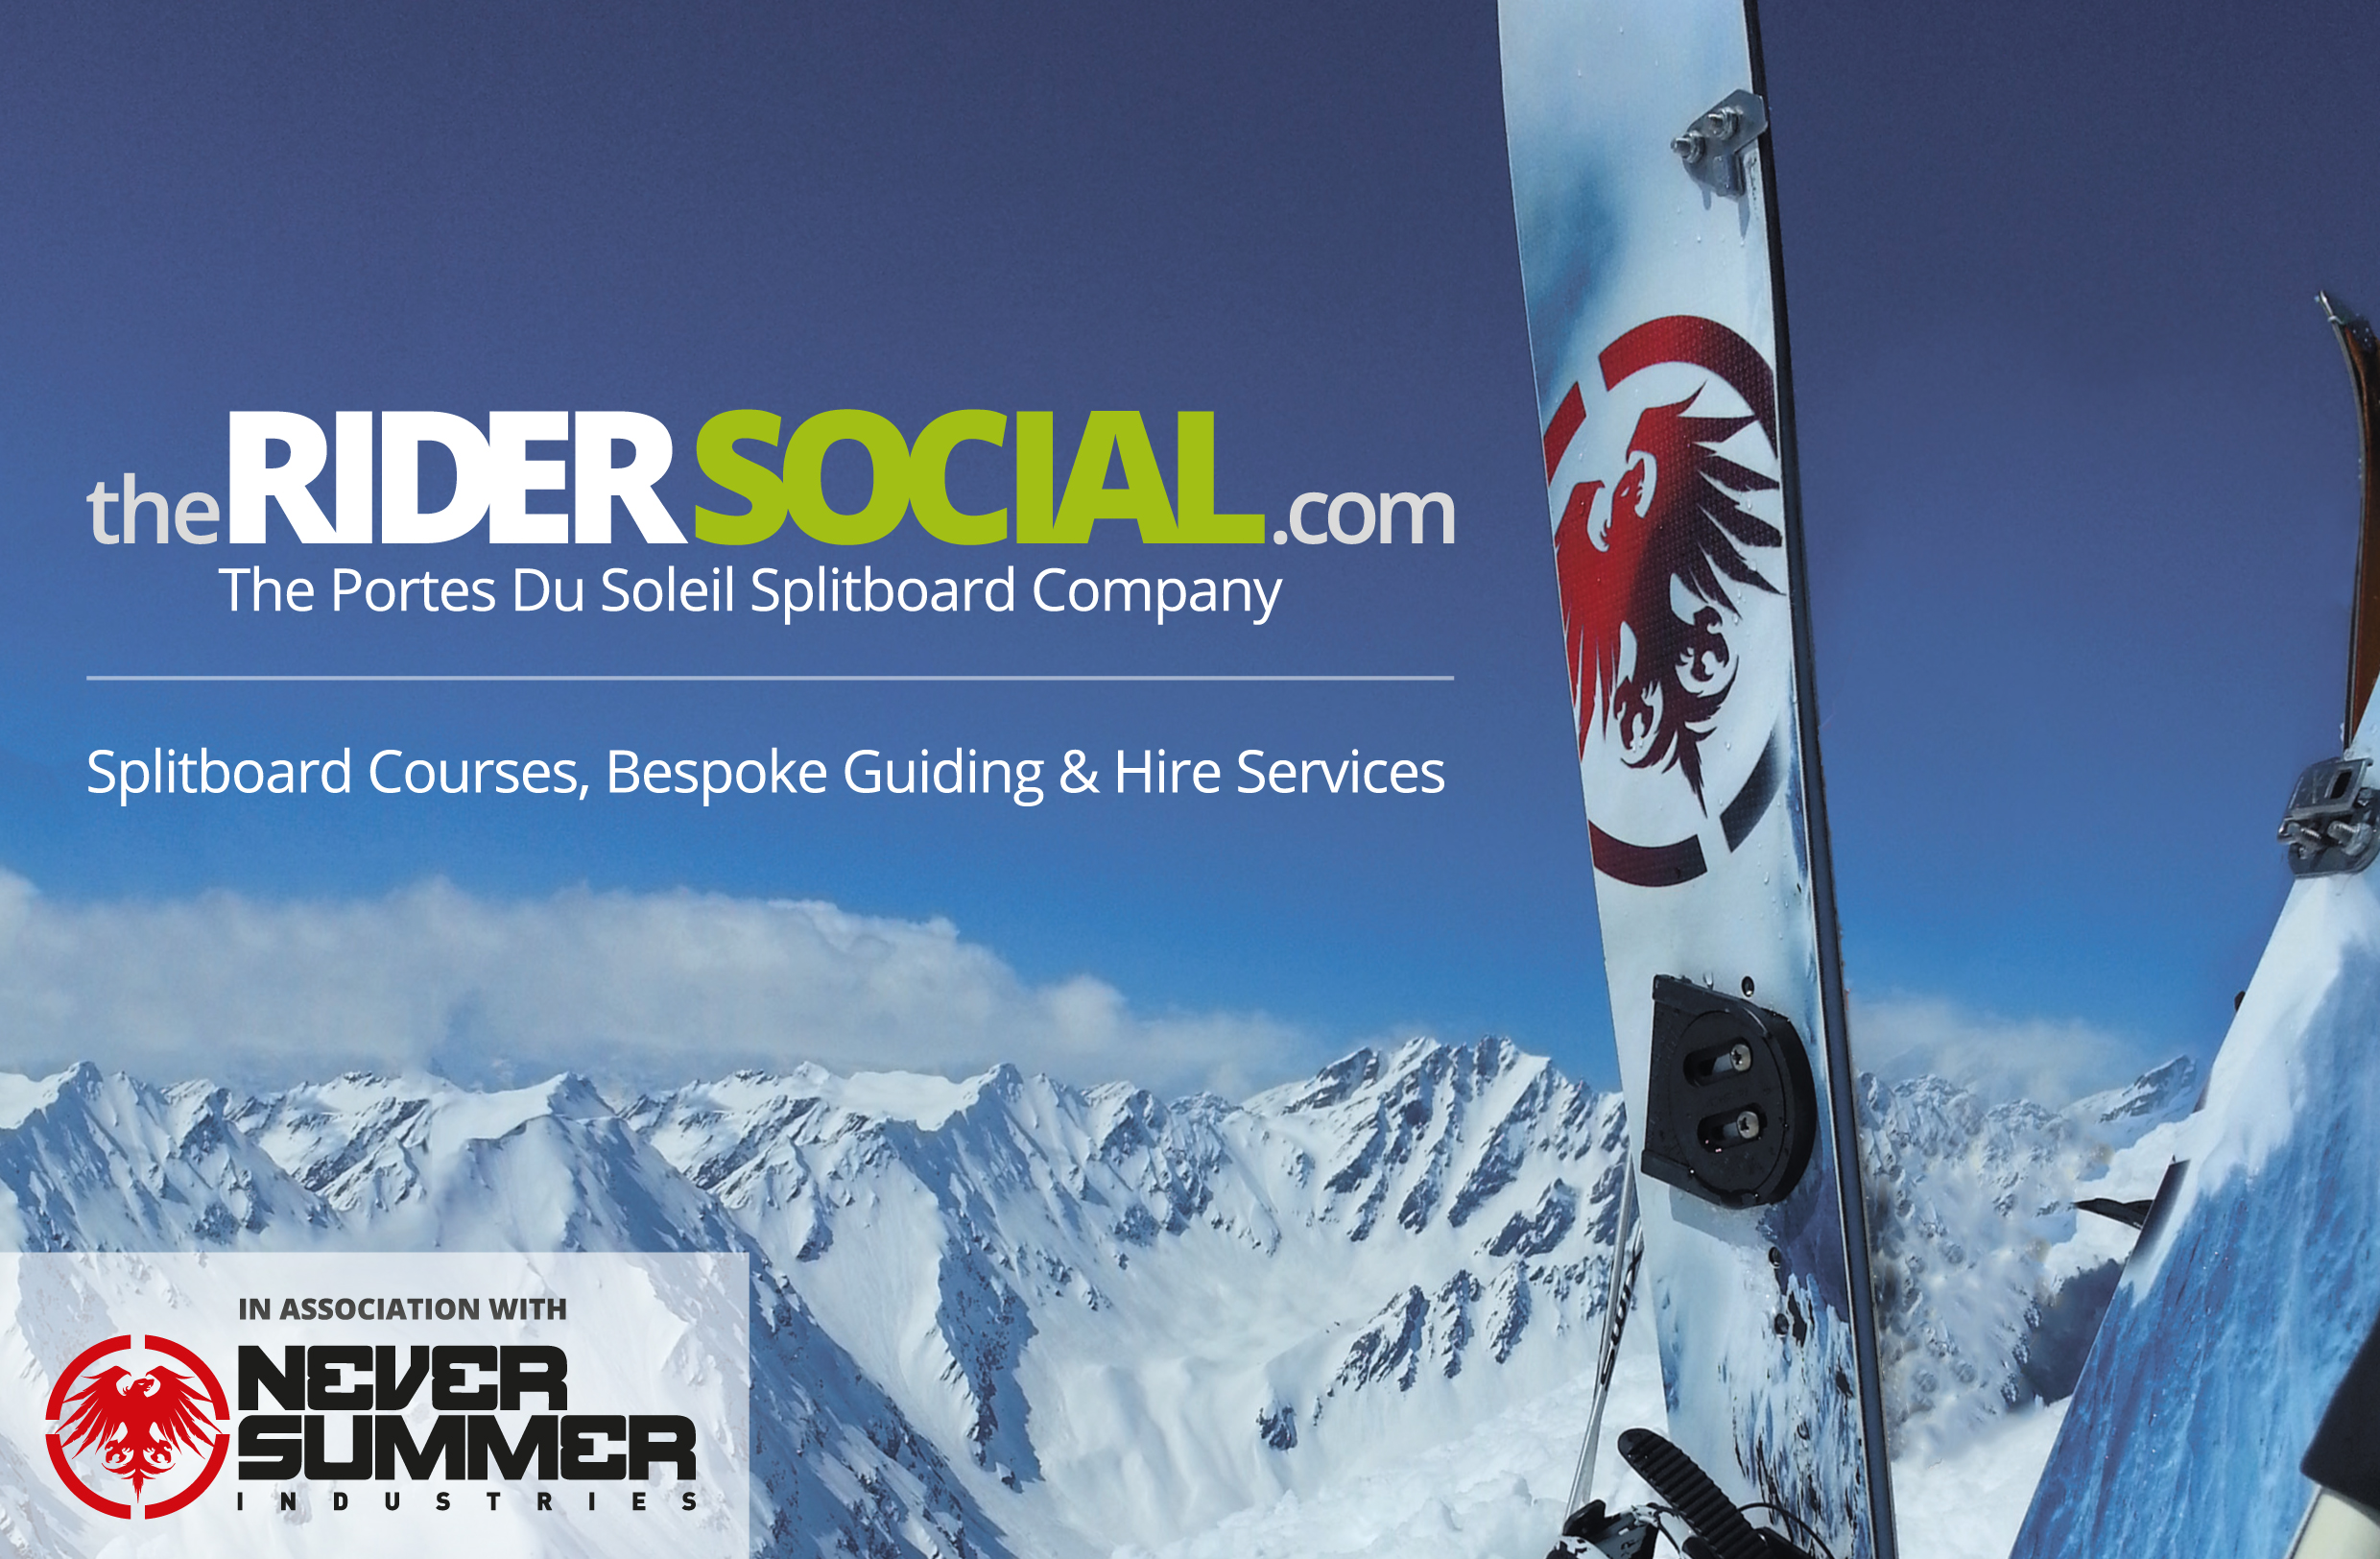 The Rider Social x Never Summer Splitboard and Backcountry Holidays